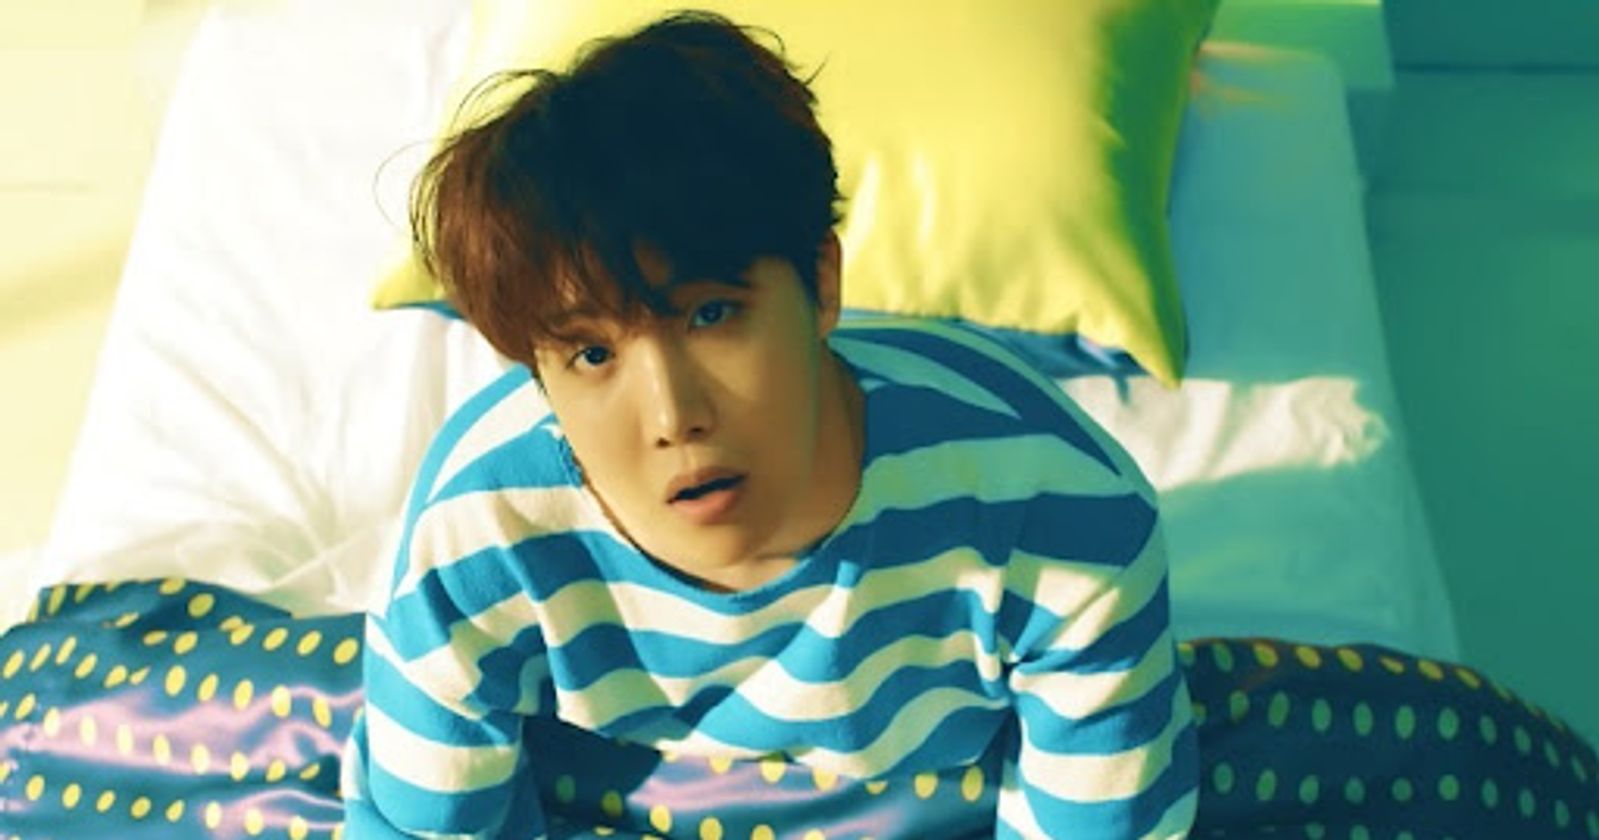 Hobicore — j-hope's iconic aesthetic serves looks and inspiration, by  Andie